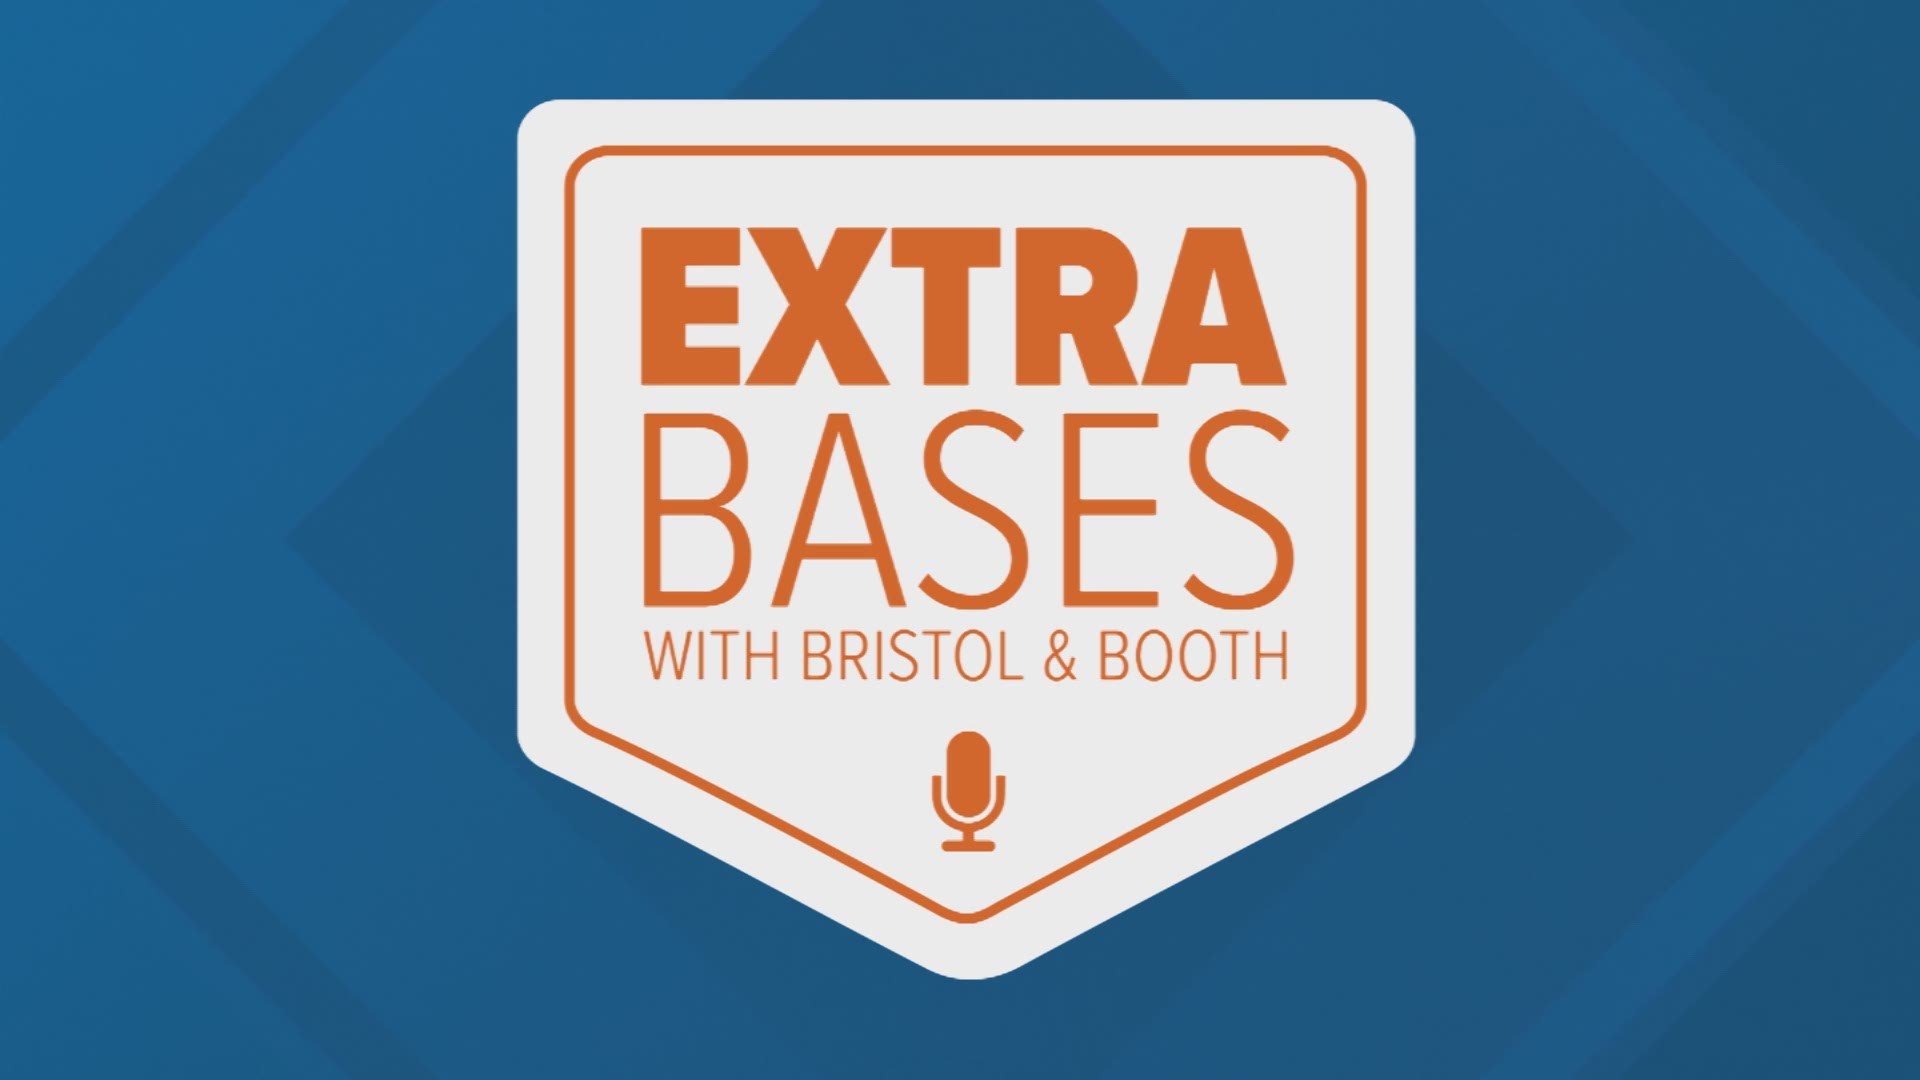 KHOU 11 anchor Jason Bristol and former major league scout Jeremy Booth break down all things baseball in episode 23 of Extra Bases.